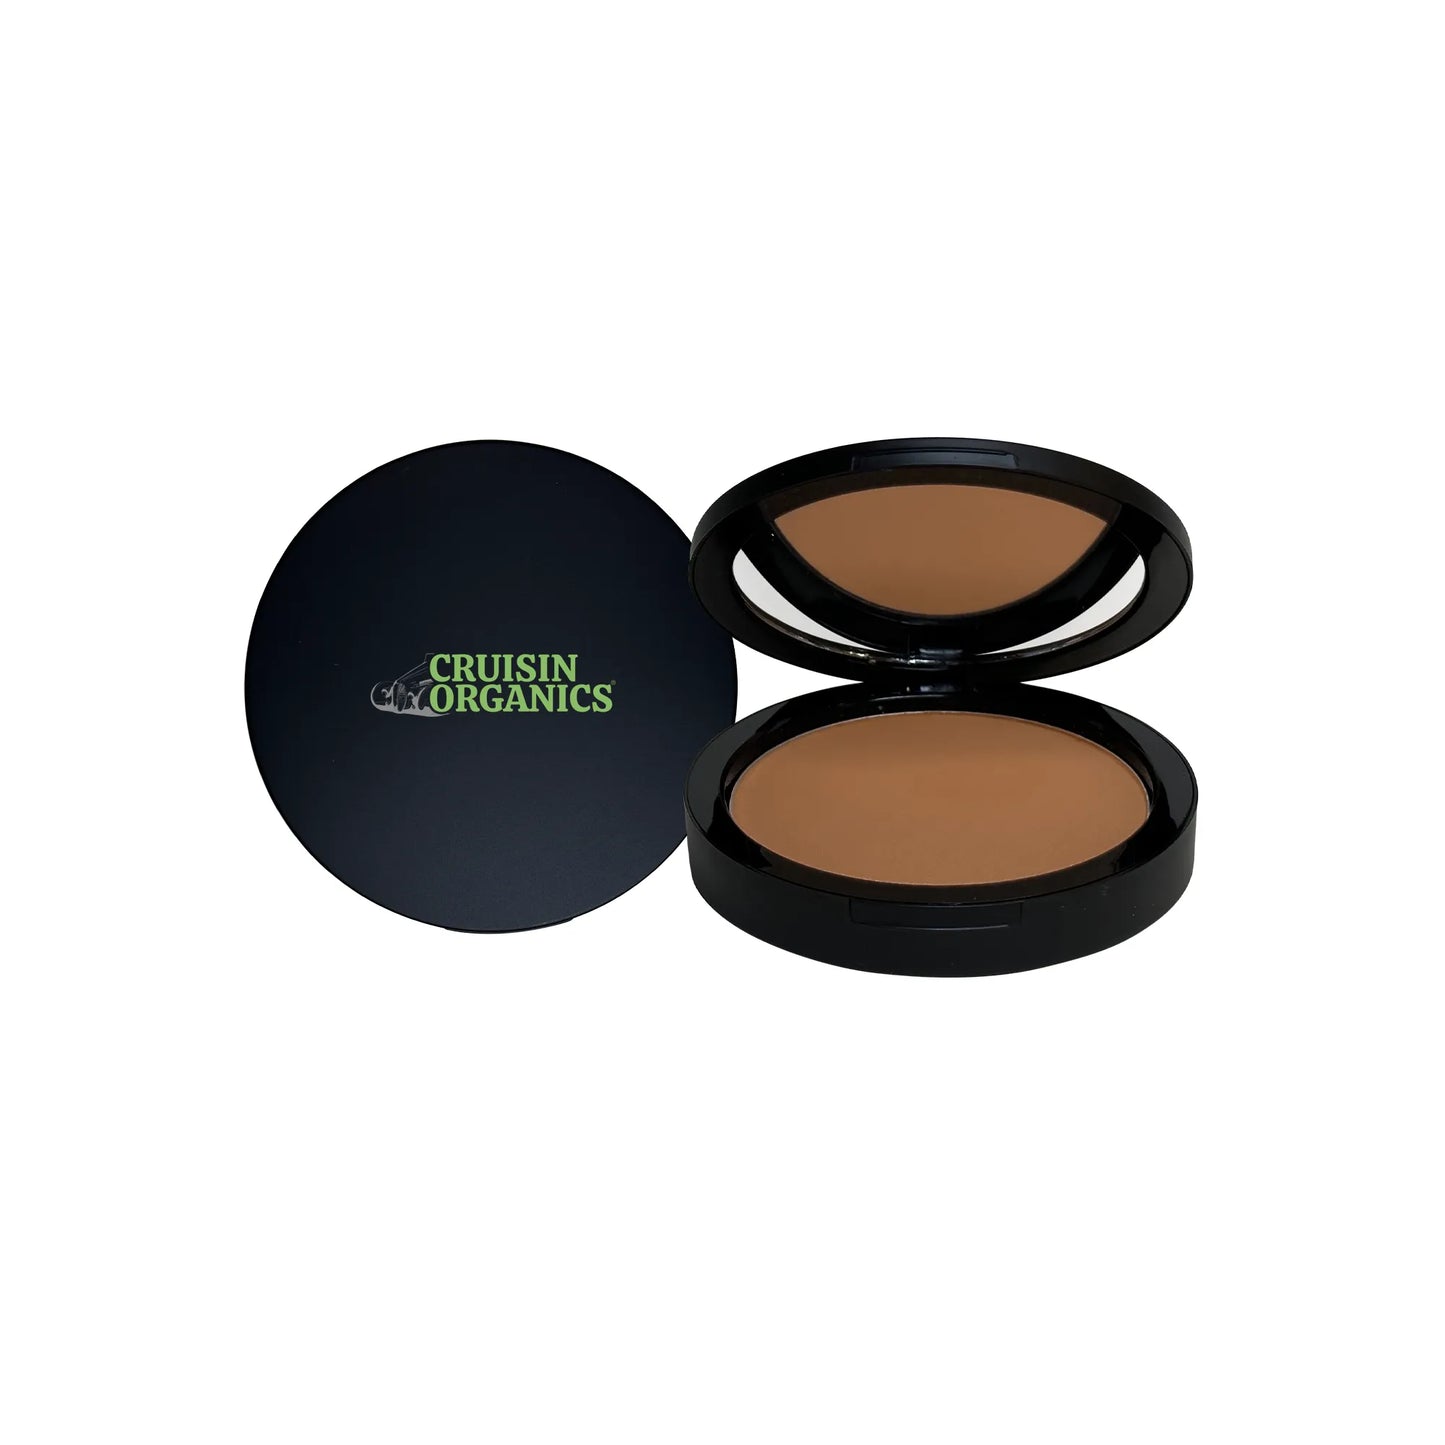 The Gingerbread Powder Foundation by Cruisin Organics is natural, nutrient-rich, and cost-effective. Made with natural ingredients for better results.